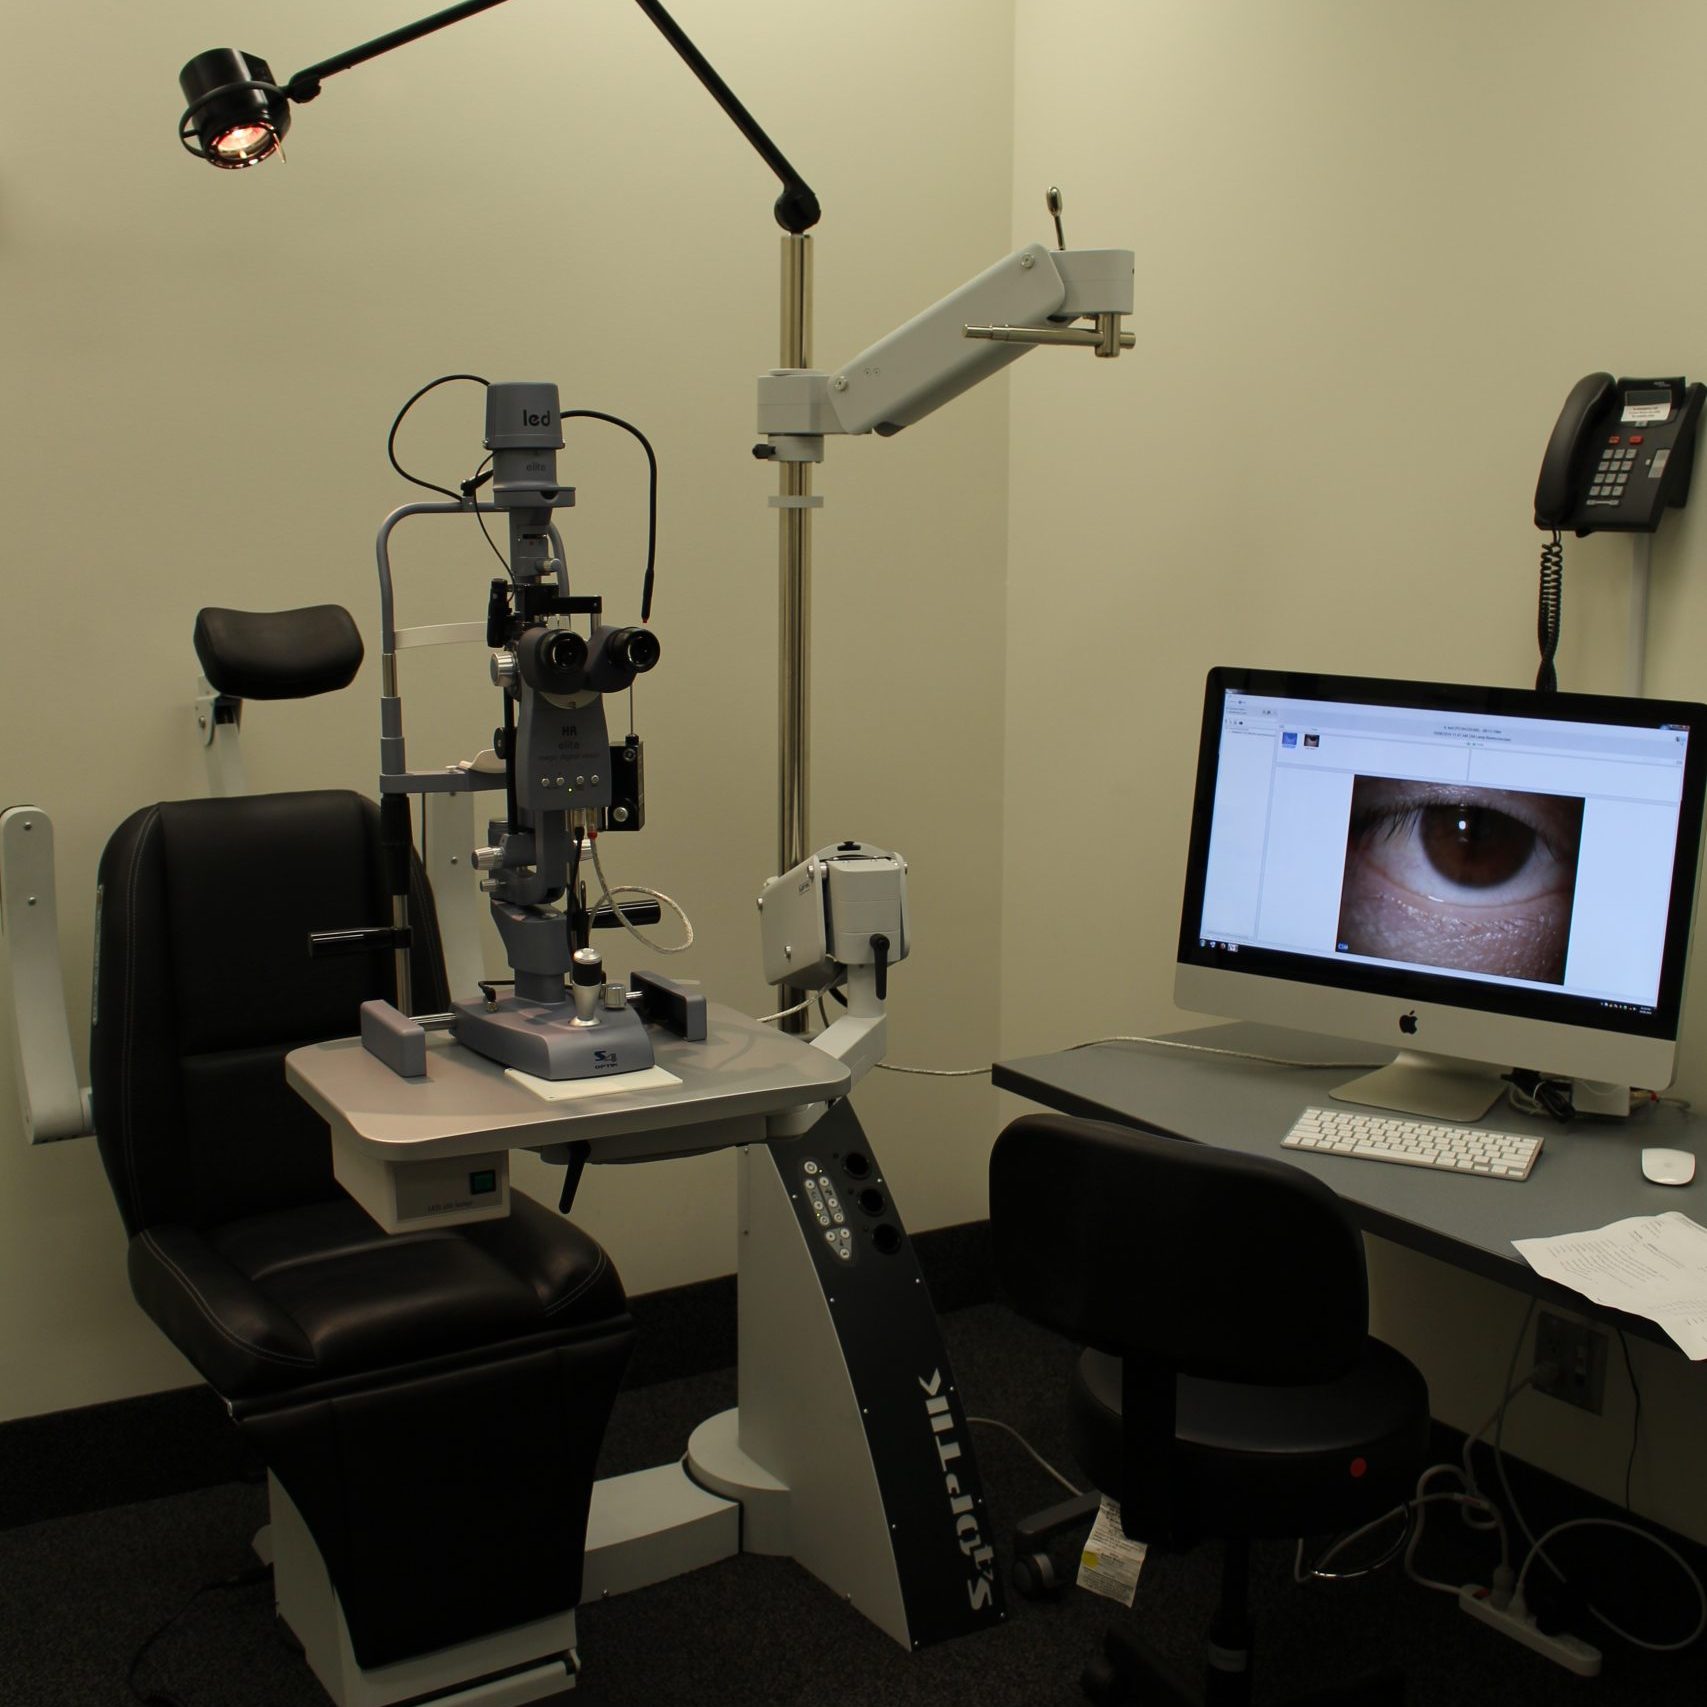 A room fitted with optometry equipment and a screen with an image of an eye being displayed